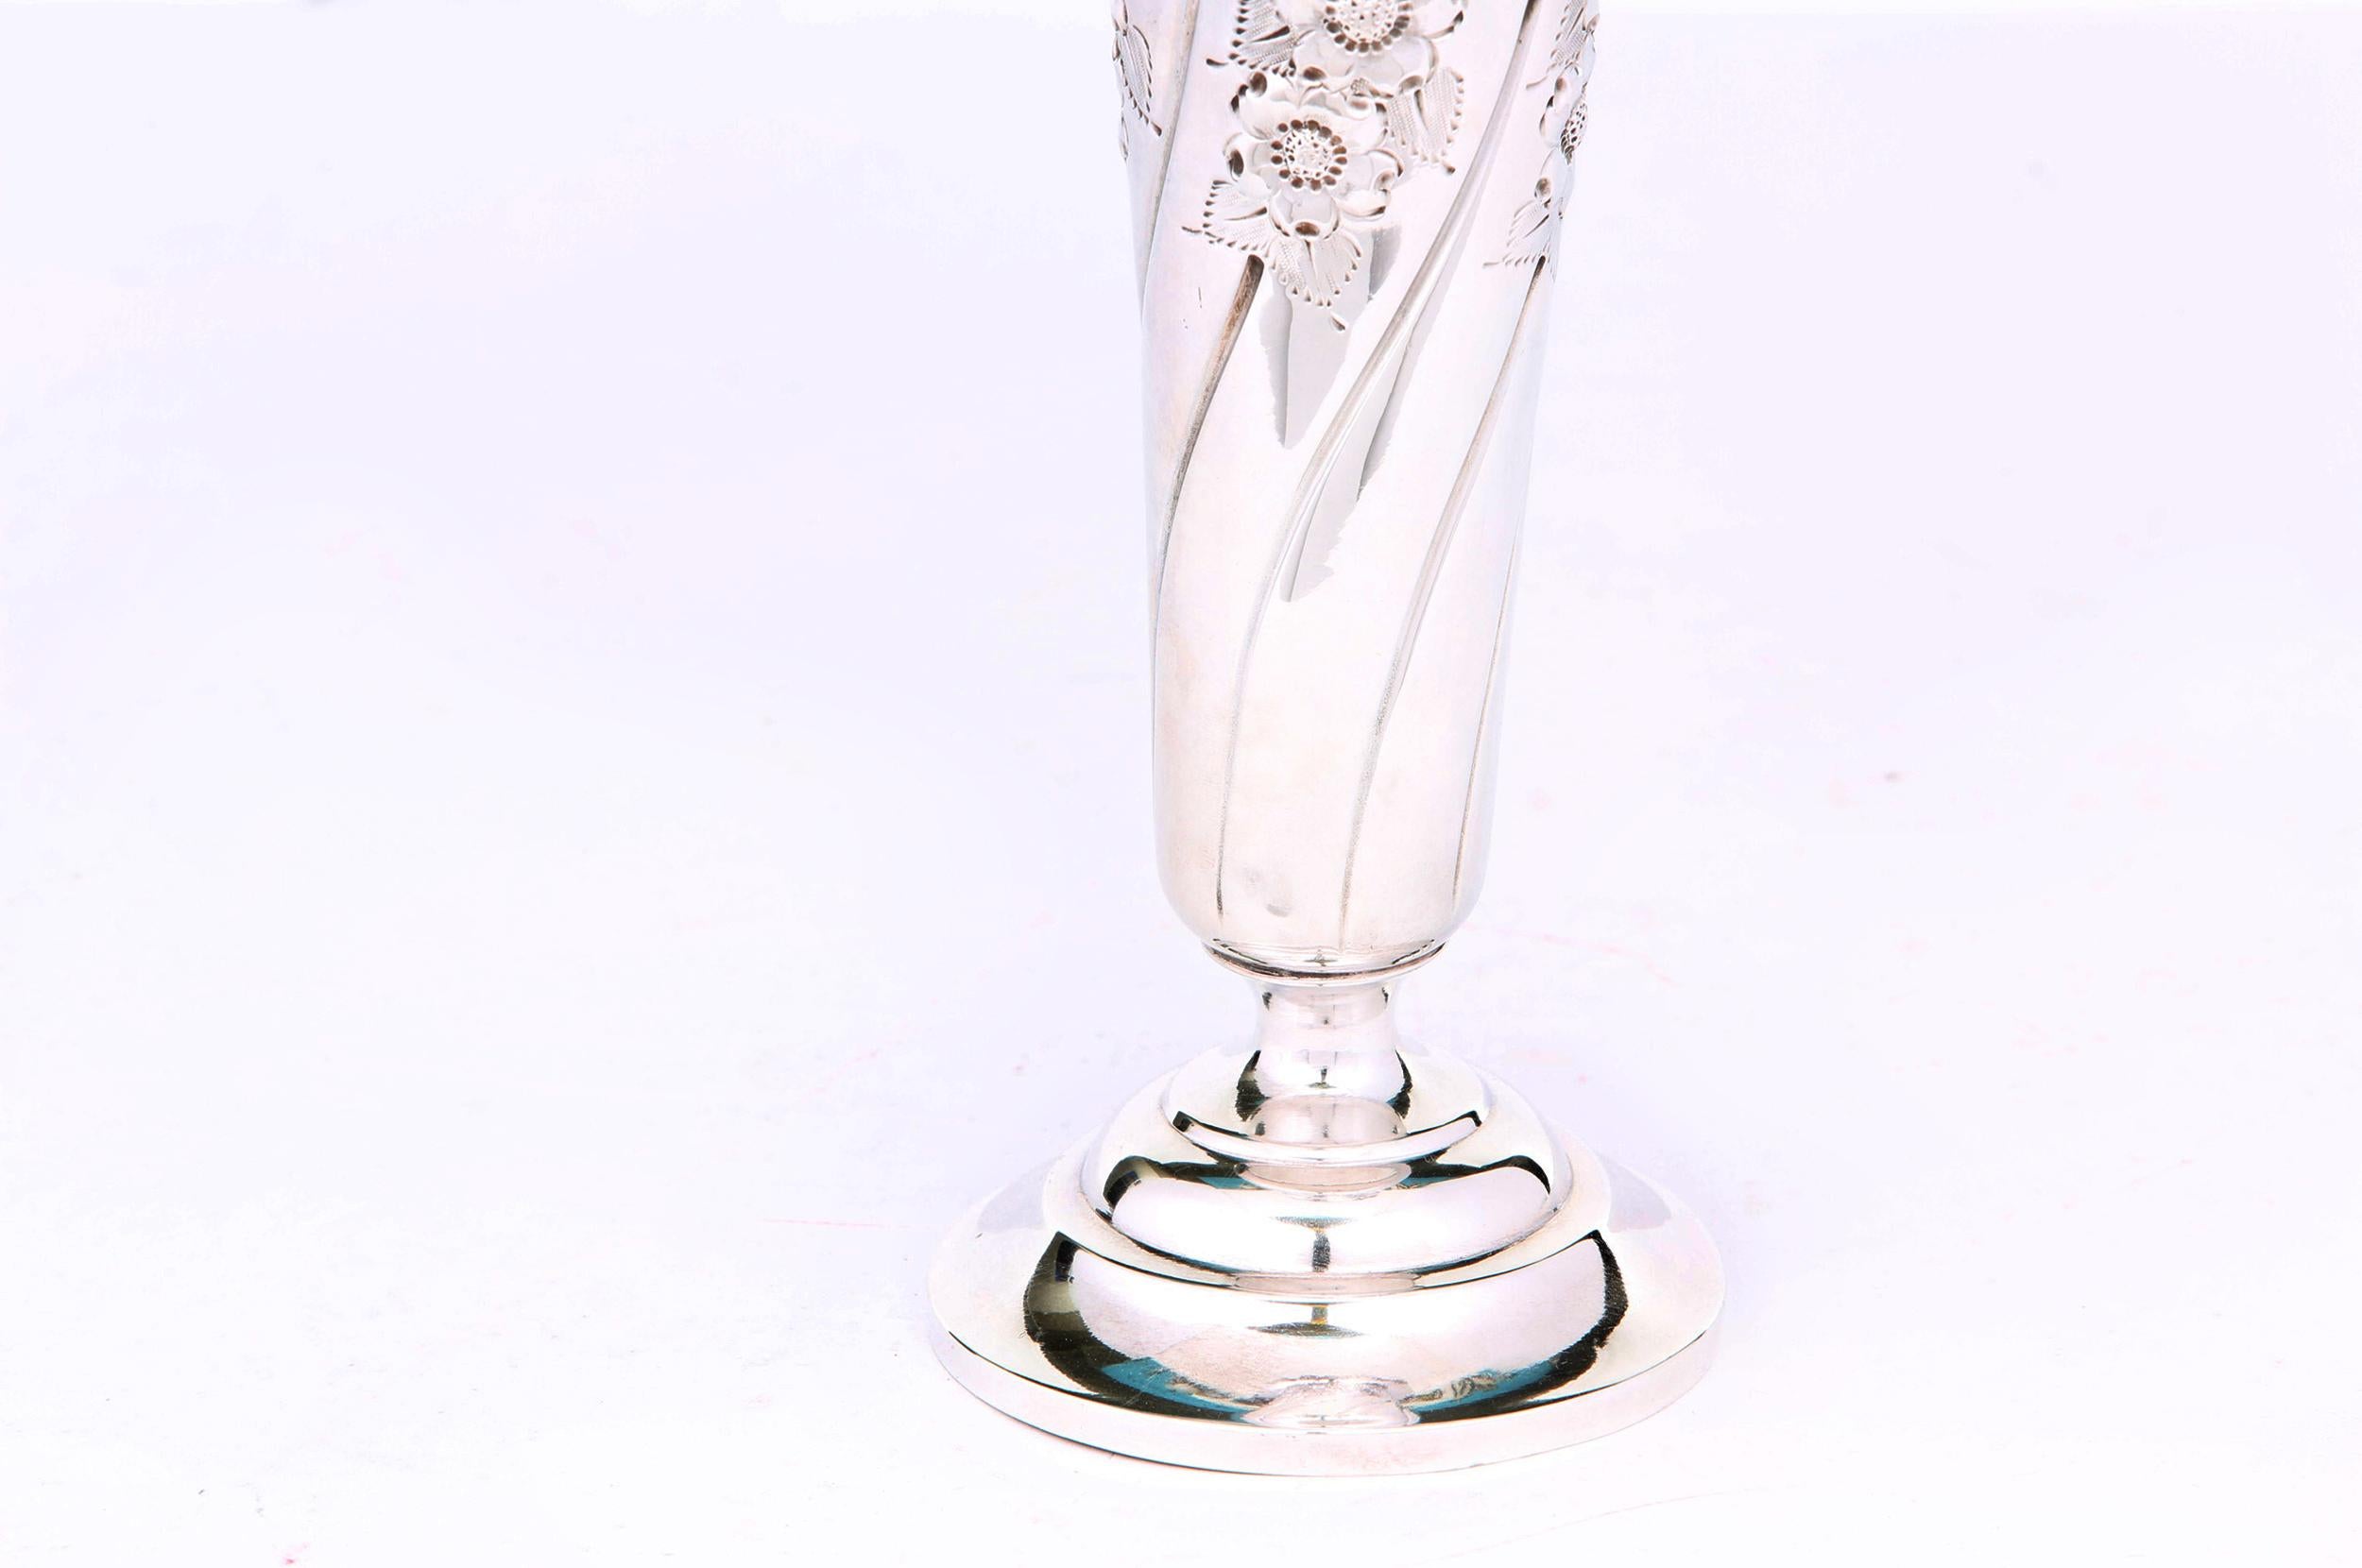 19th Century English Silver Plated Decorative Vase For Sale